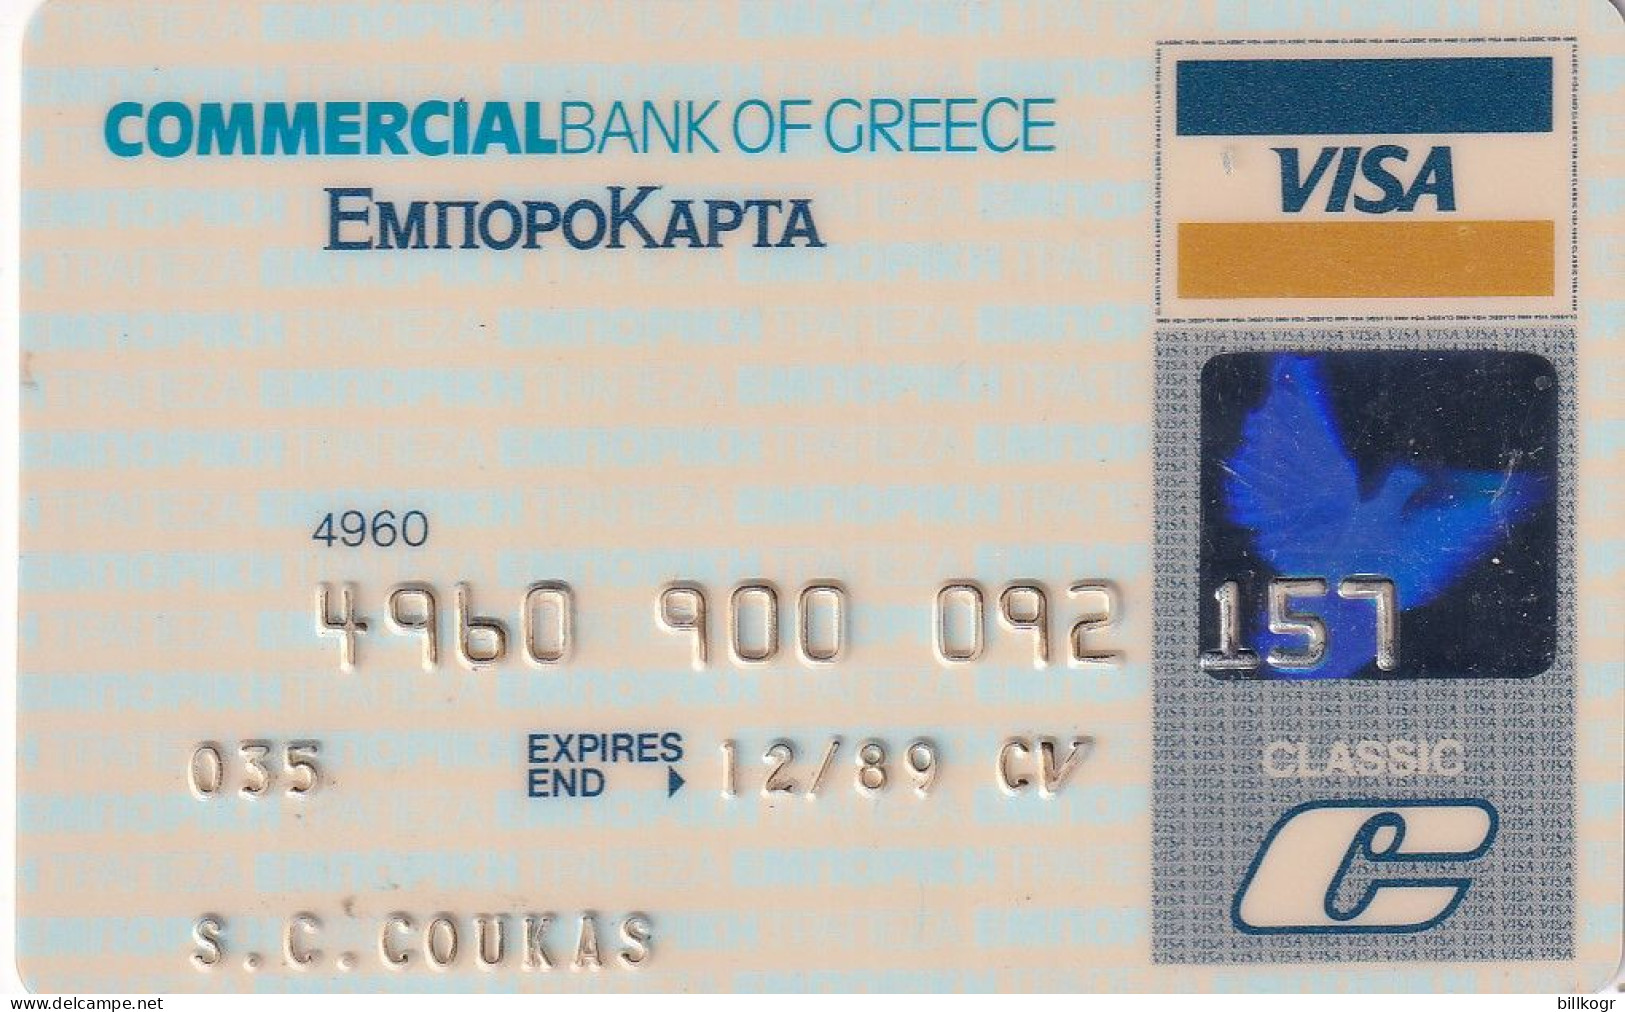 GREECE - Commercial Bank Classic Visa, 01/87, Used - Credit Cards (Exp. Date Min. 10 Years)